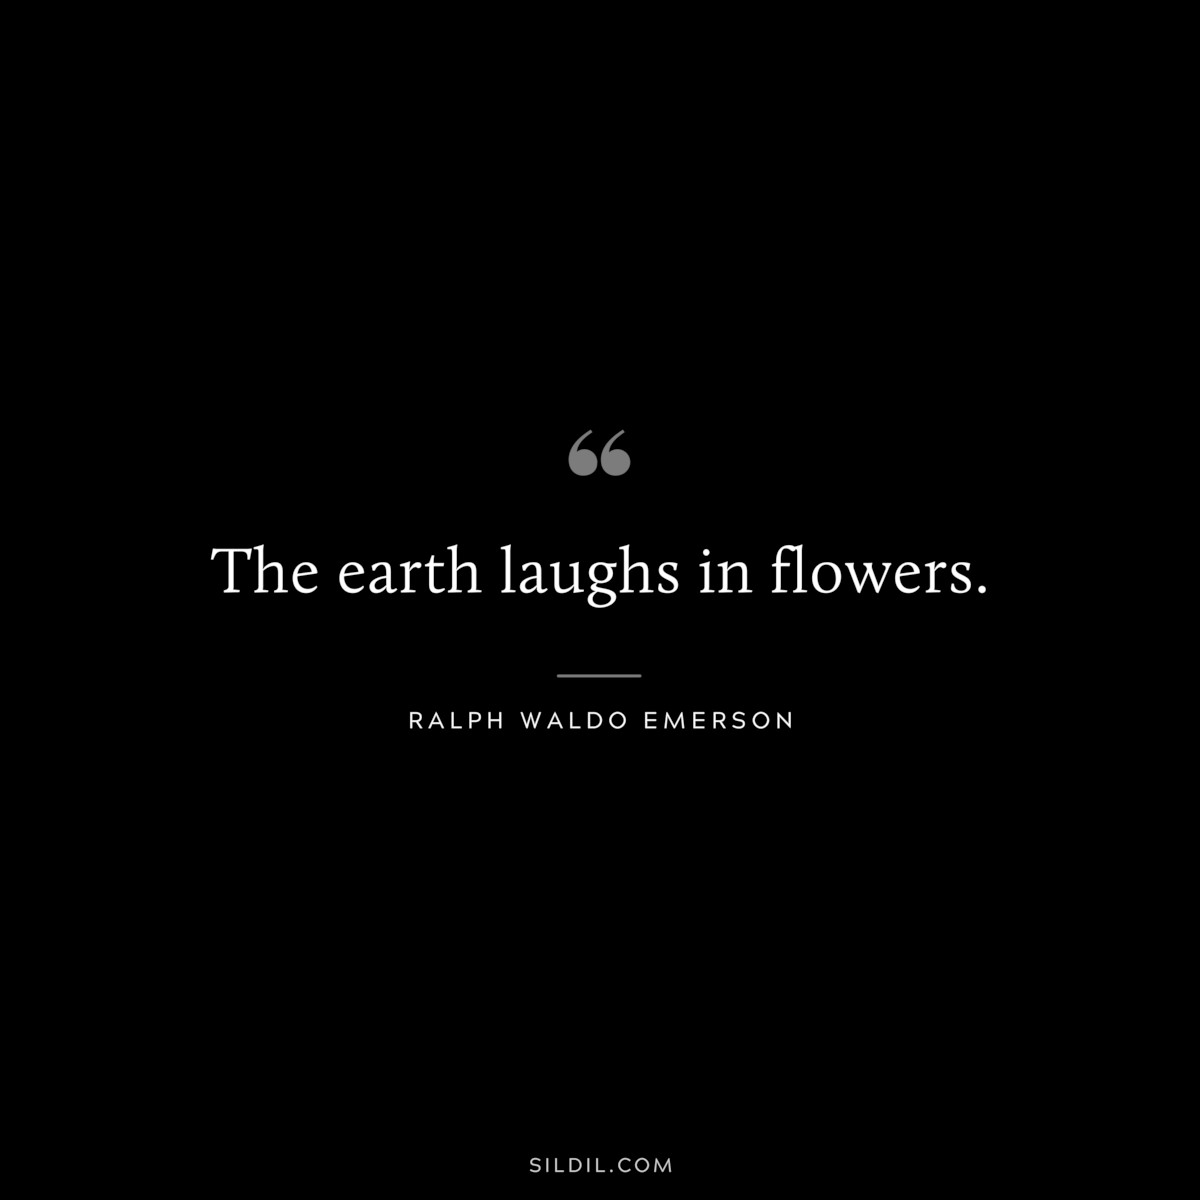 The earth laughs in flowers. — Ralph Waldo Emerson